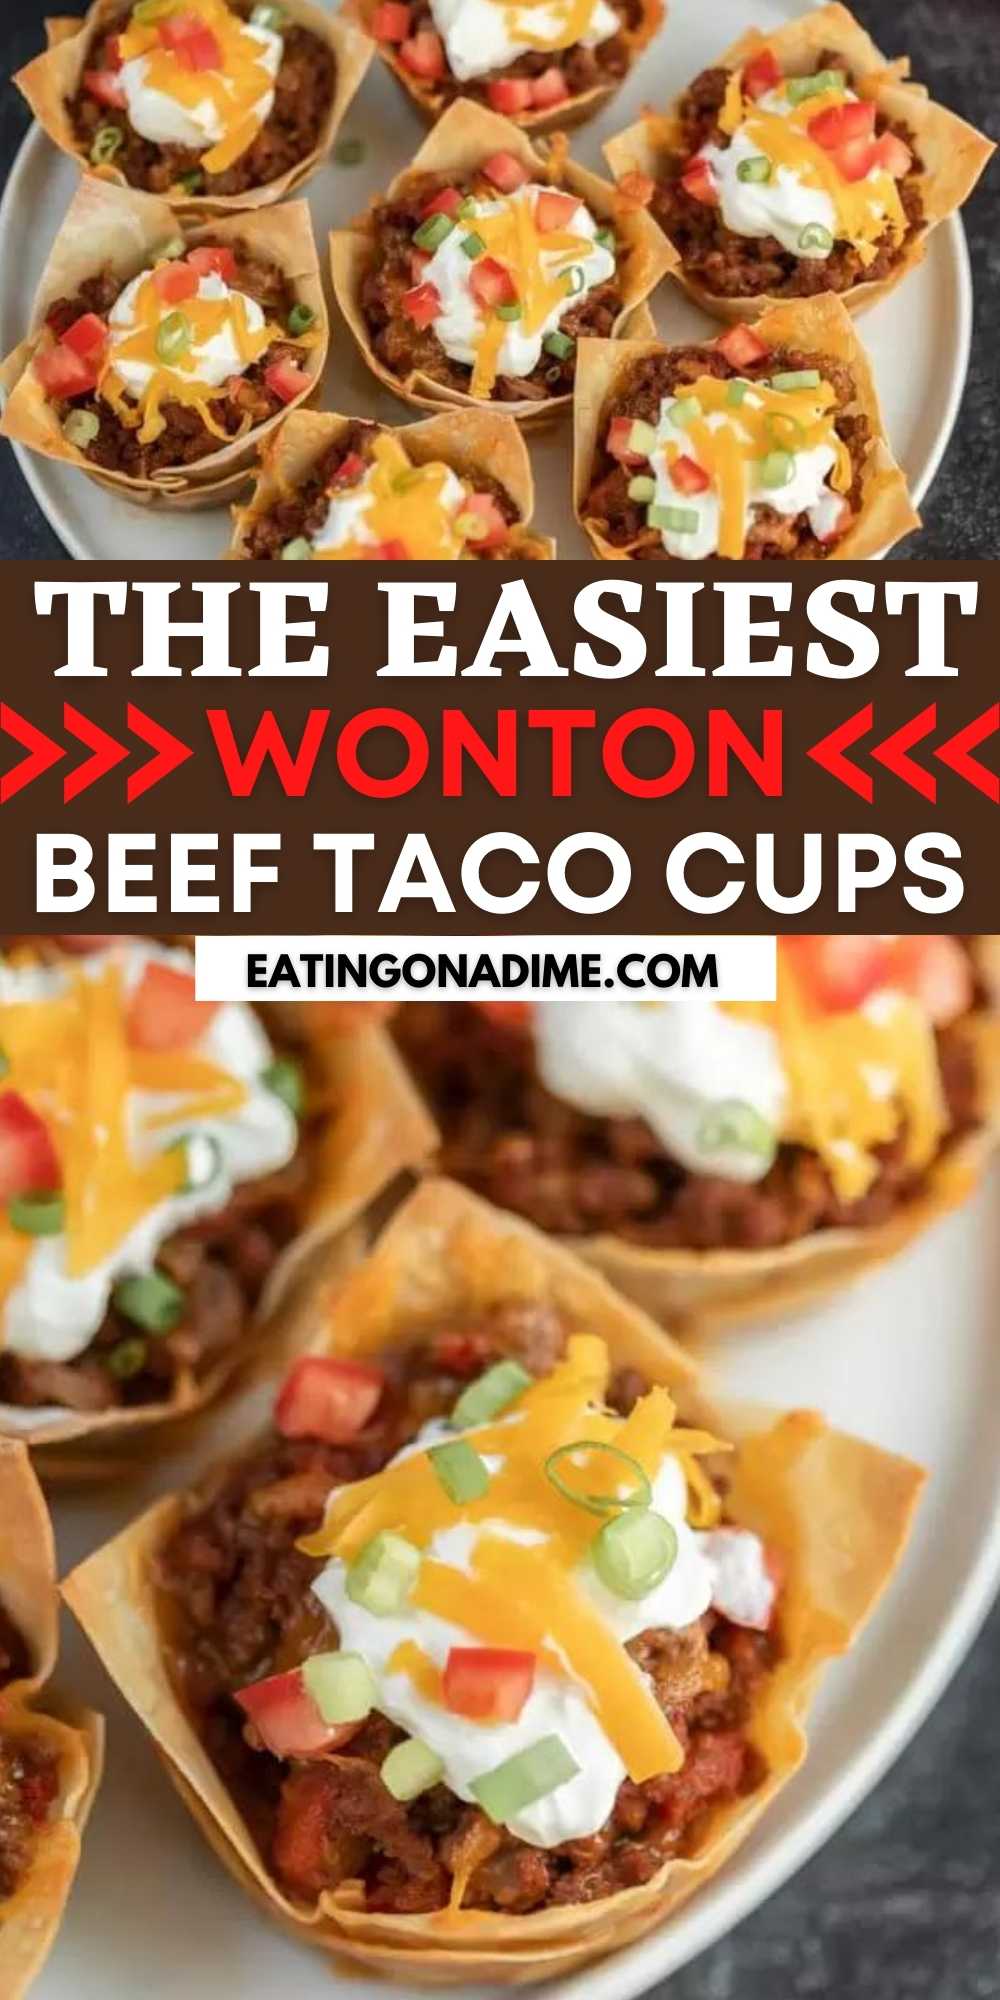 You will love these easy Wonton Taco Cups. This recipe has lots of cheese and yummy taco meat, veggies and more! Give it a try.  This will quickly be one of your favorite appetizers that everyone will love! #eatingonadime #appetizerrecipes #wontonrecipes #beefrecipes 
